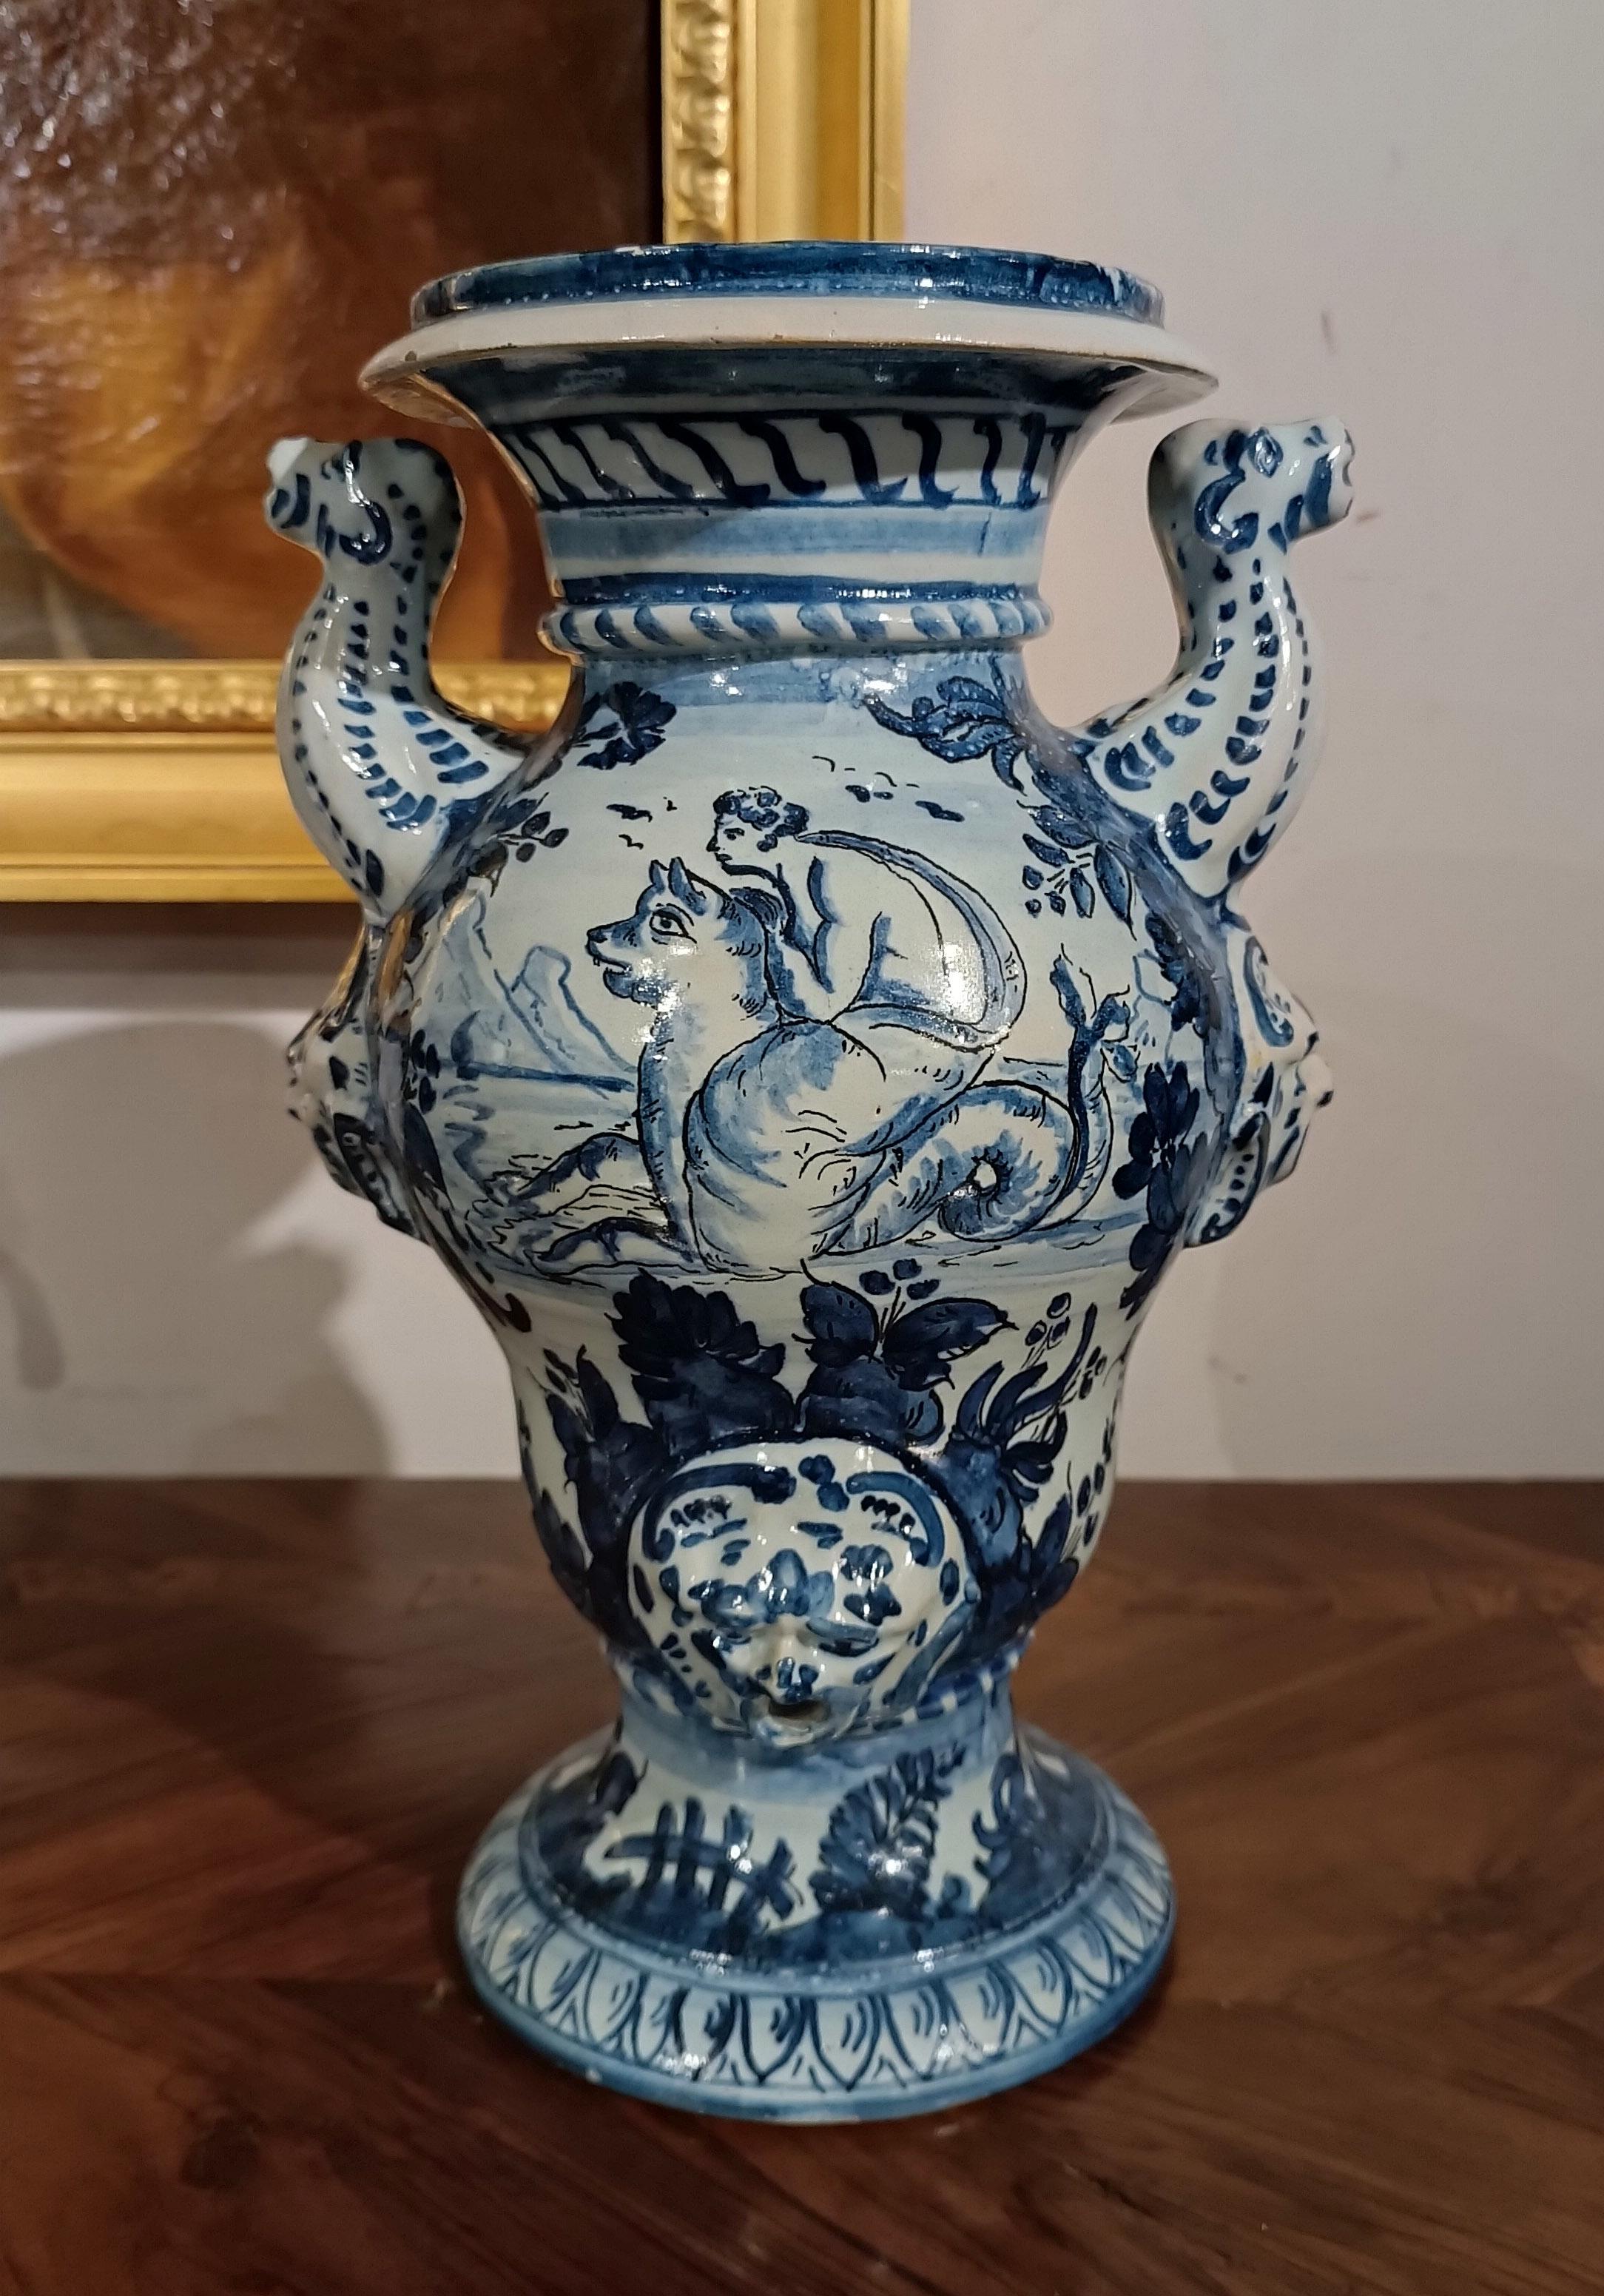 Stunning pourer made of glazed majolica, belonging to the blue family. Its fascinating design stands out for the blue decorations on a white background, which add a touch of elegance and refinement to the piece. The rim of the pourer is delicately